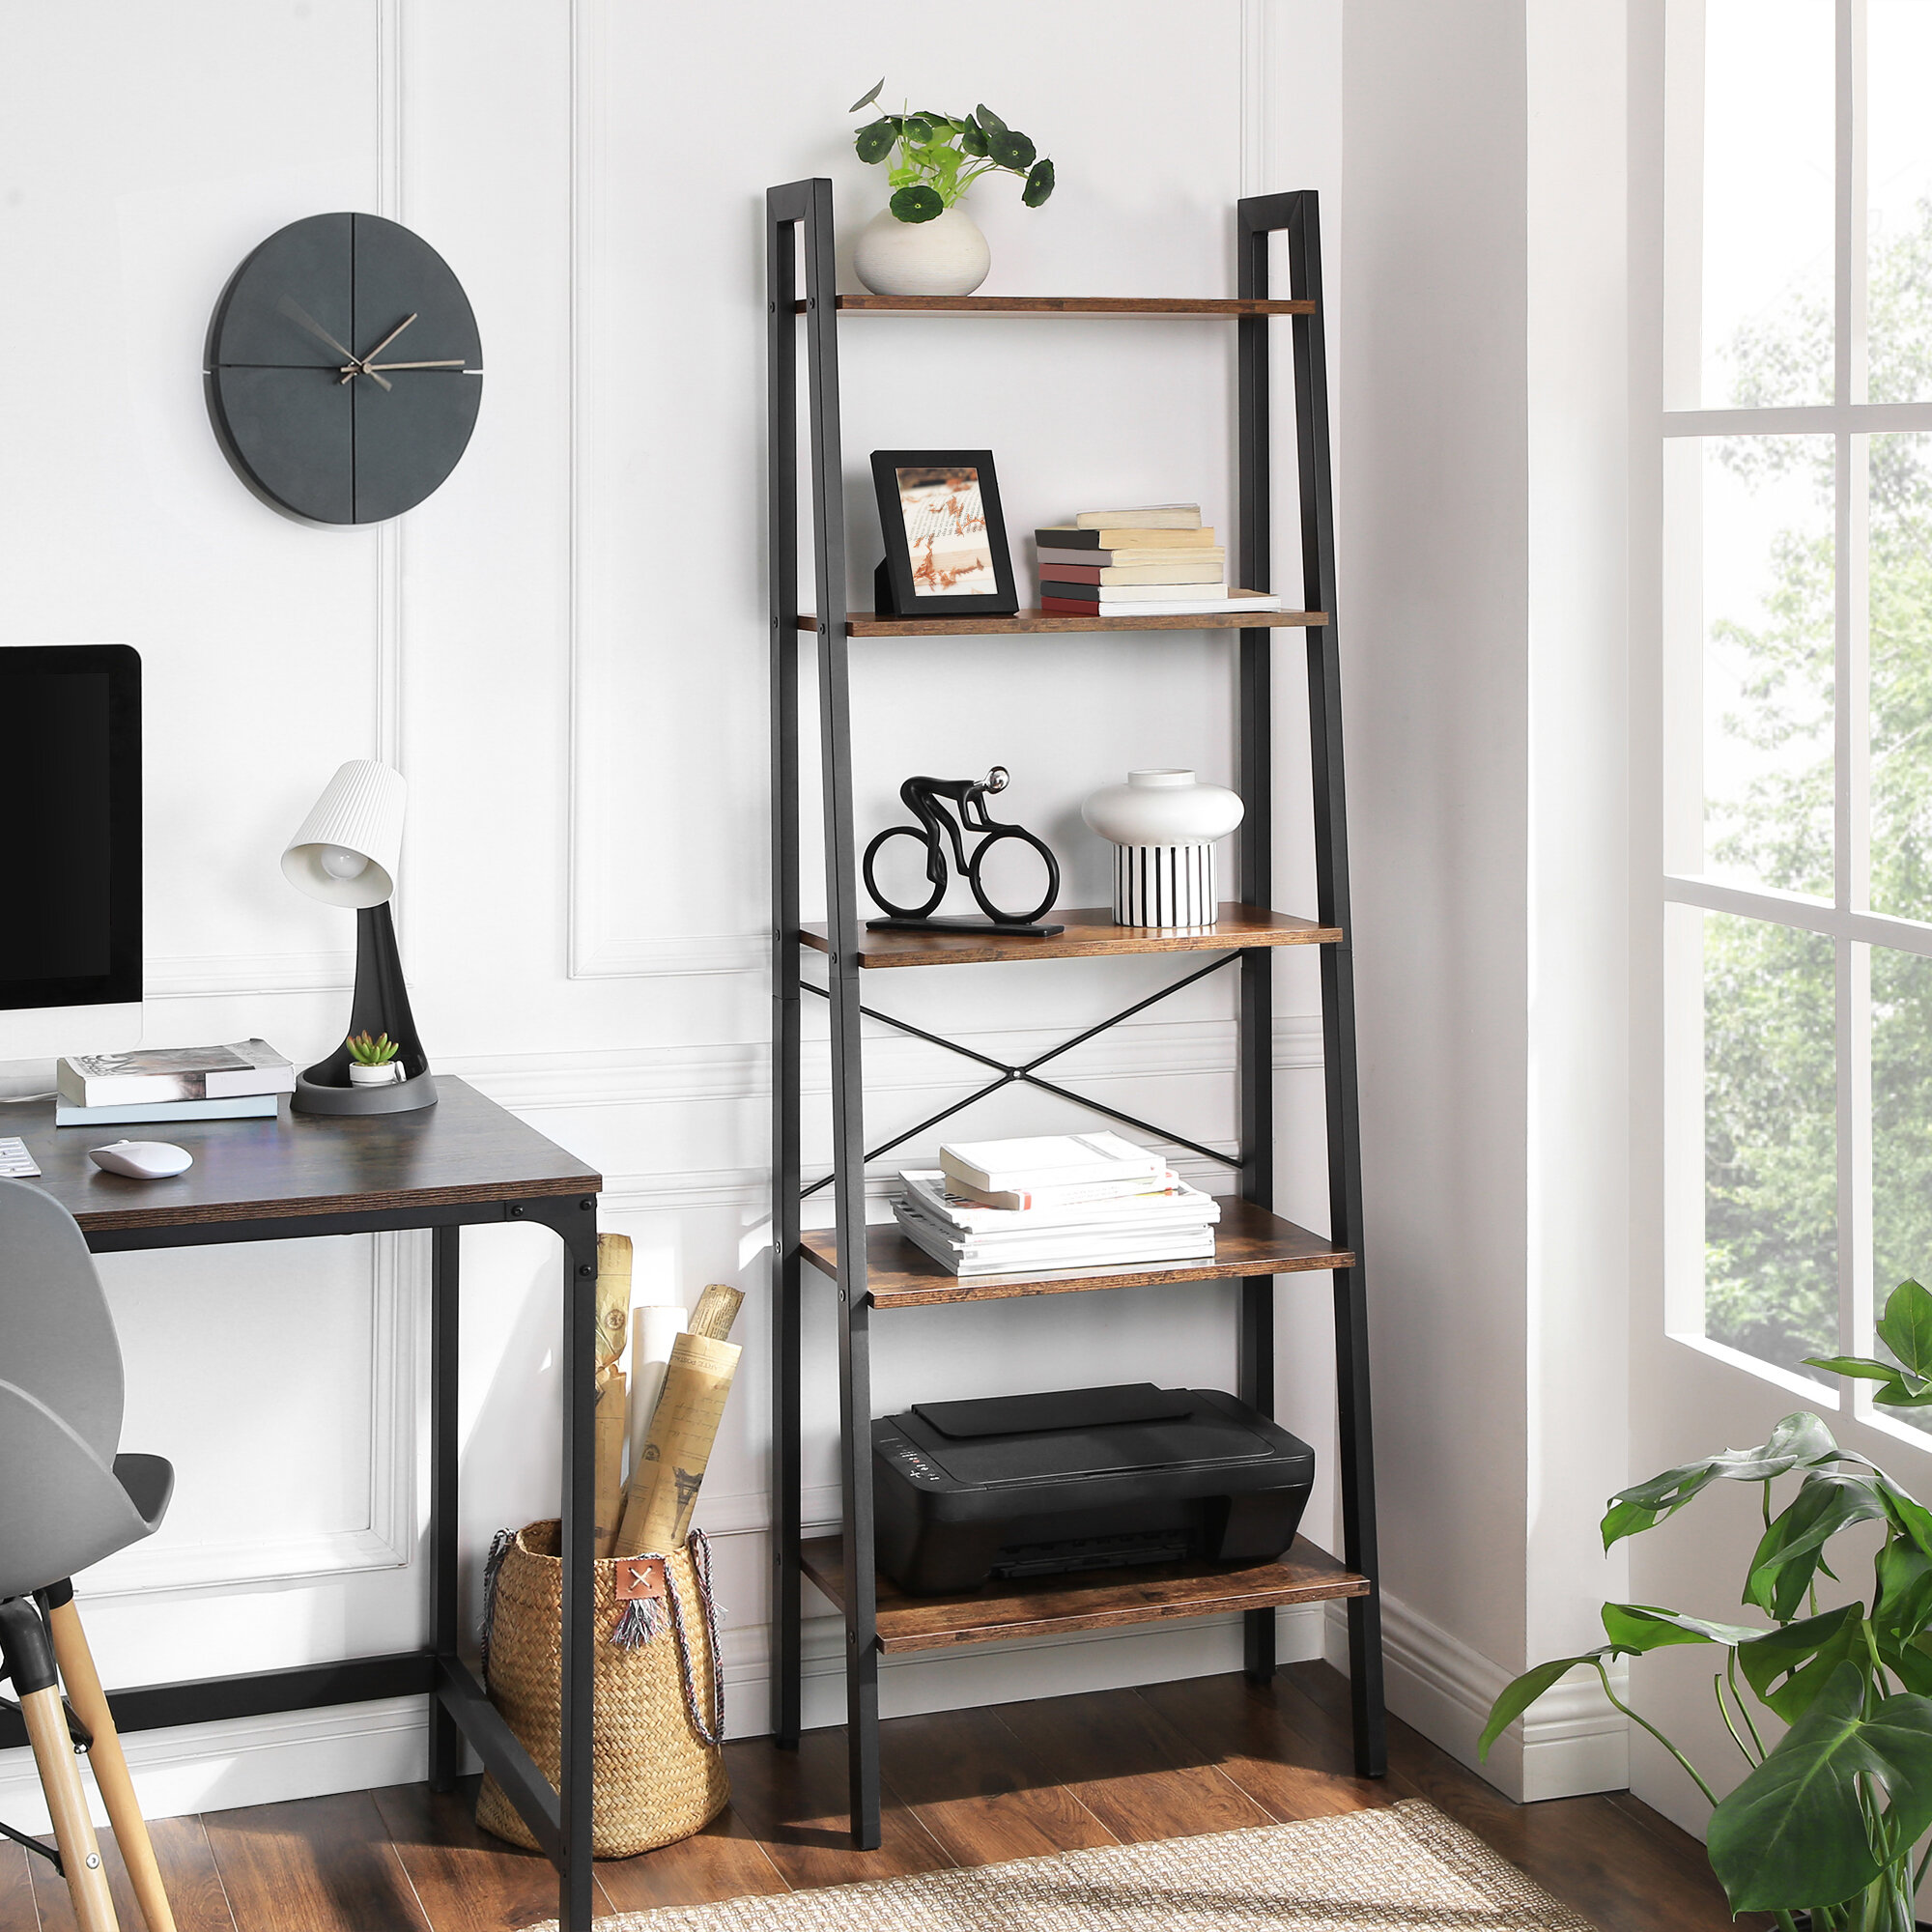 HOMEMAKE Industrial Retro Bookcases and Shelves Storage Rack Shelf Display Unit for Home Office 